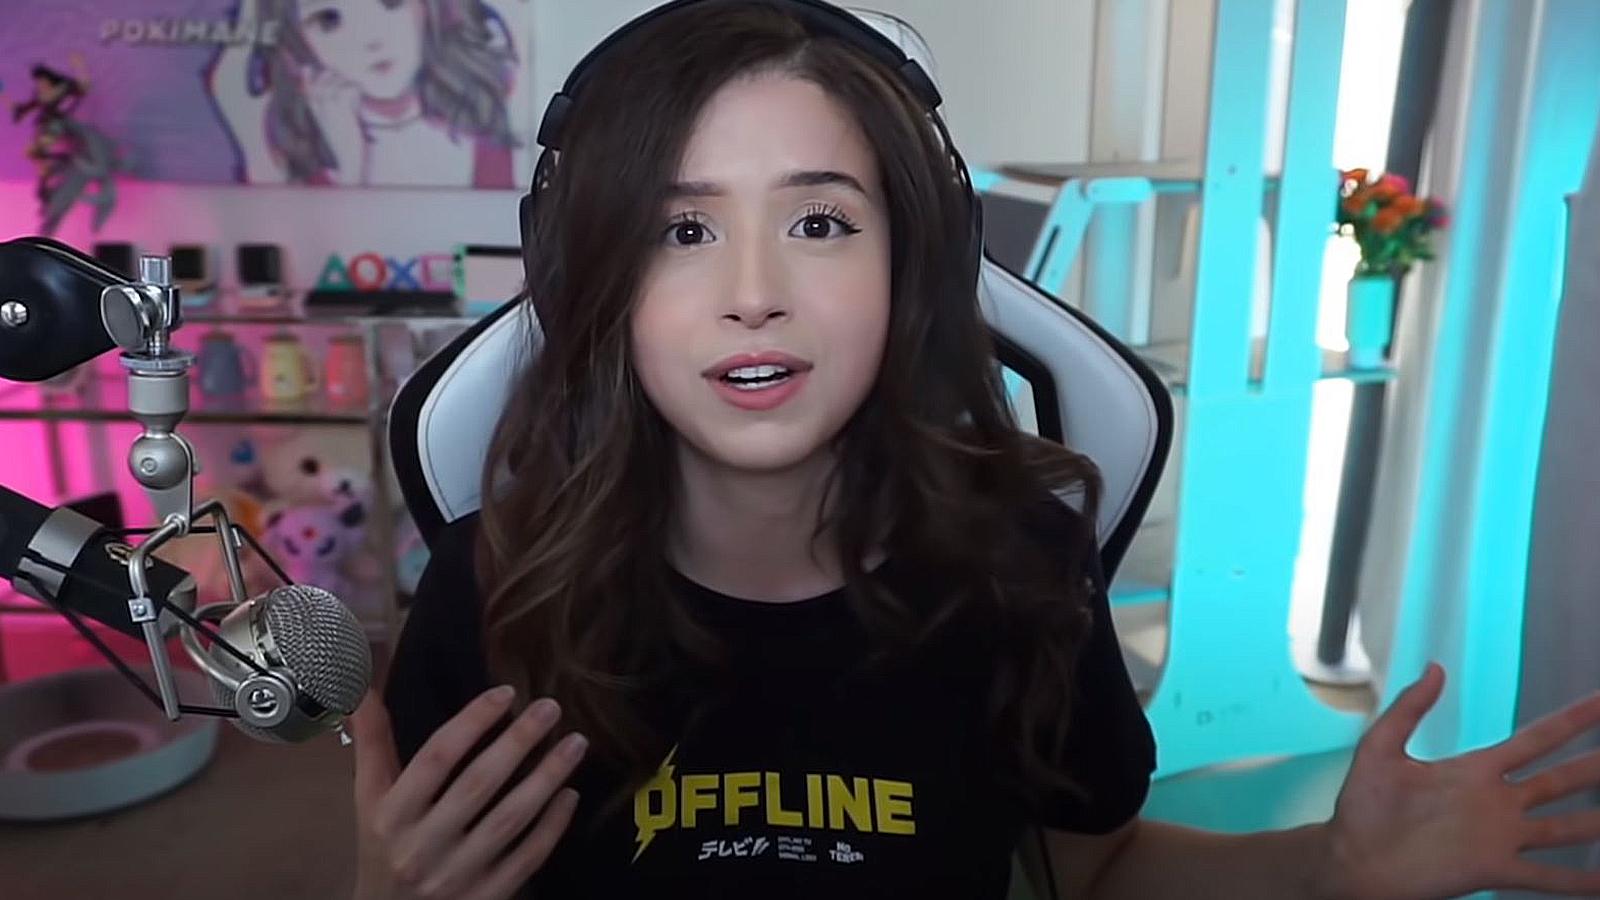 Pokimane speaks to the camera during a video.